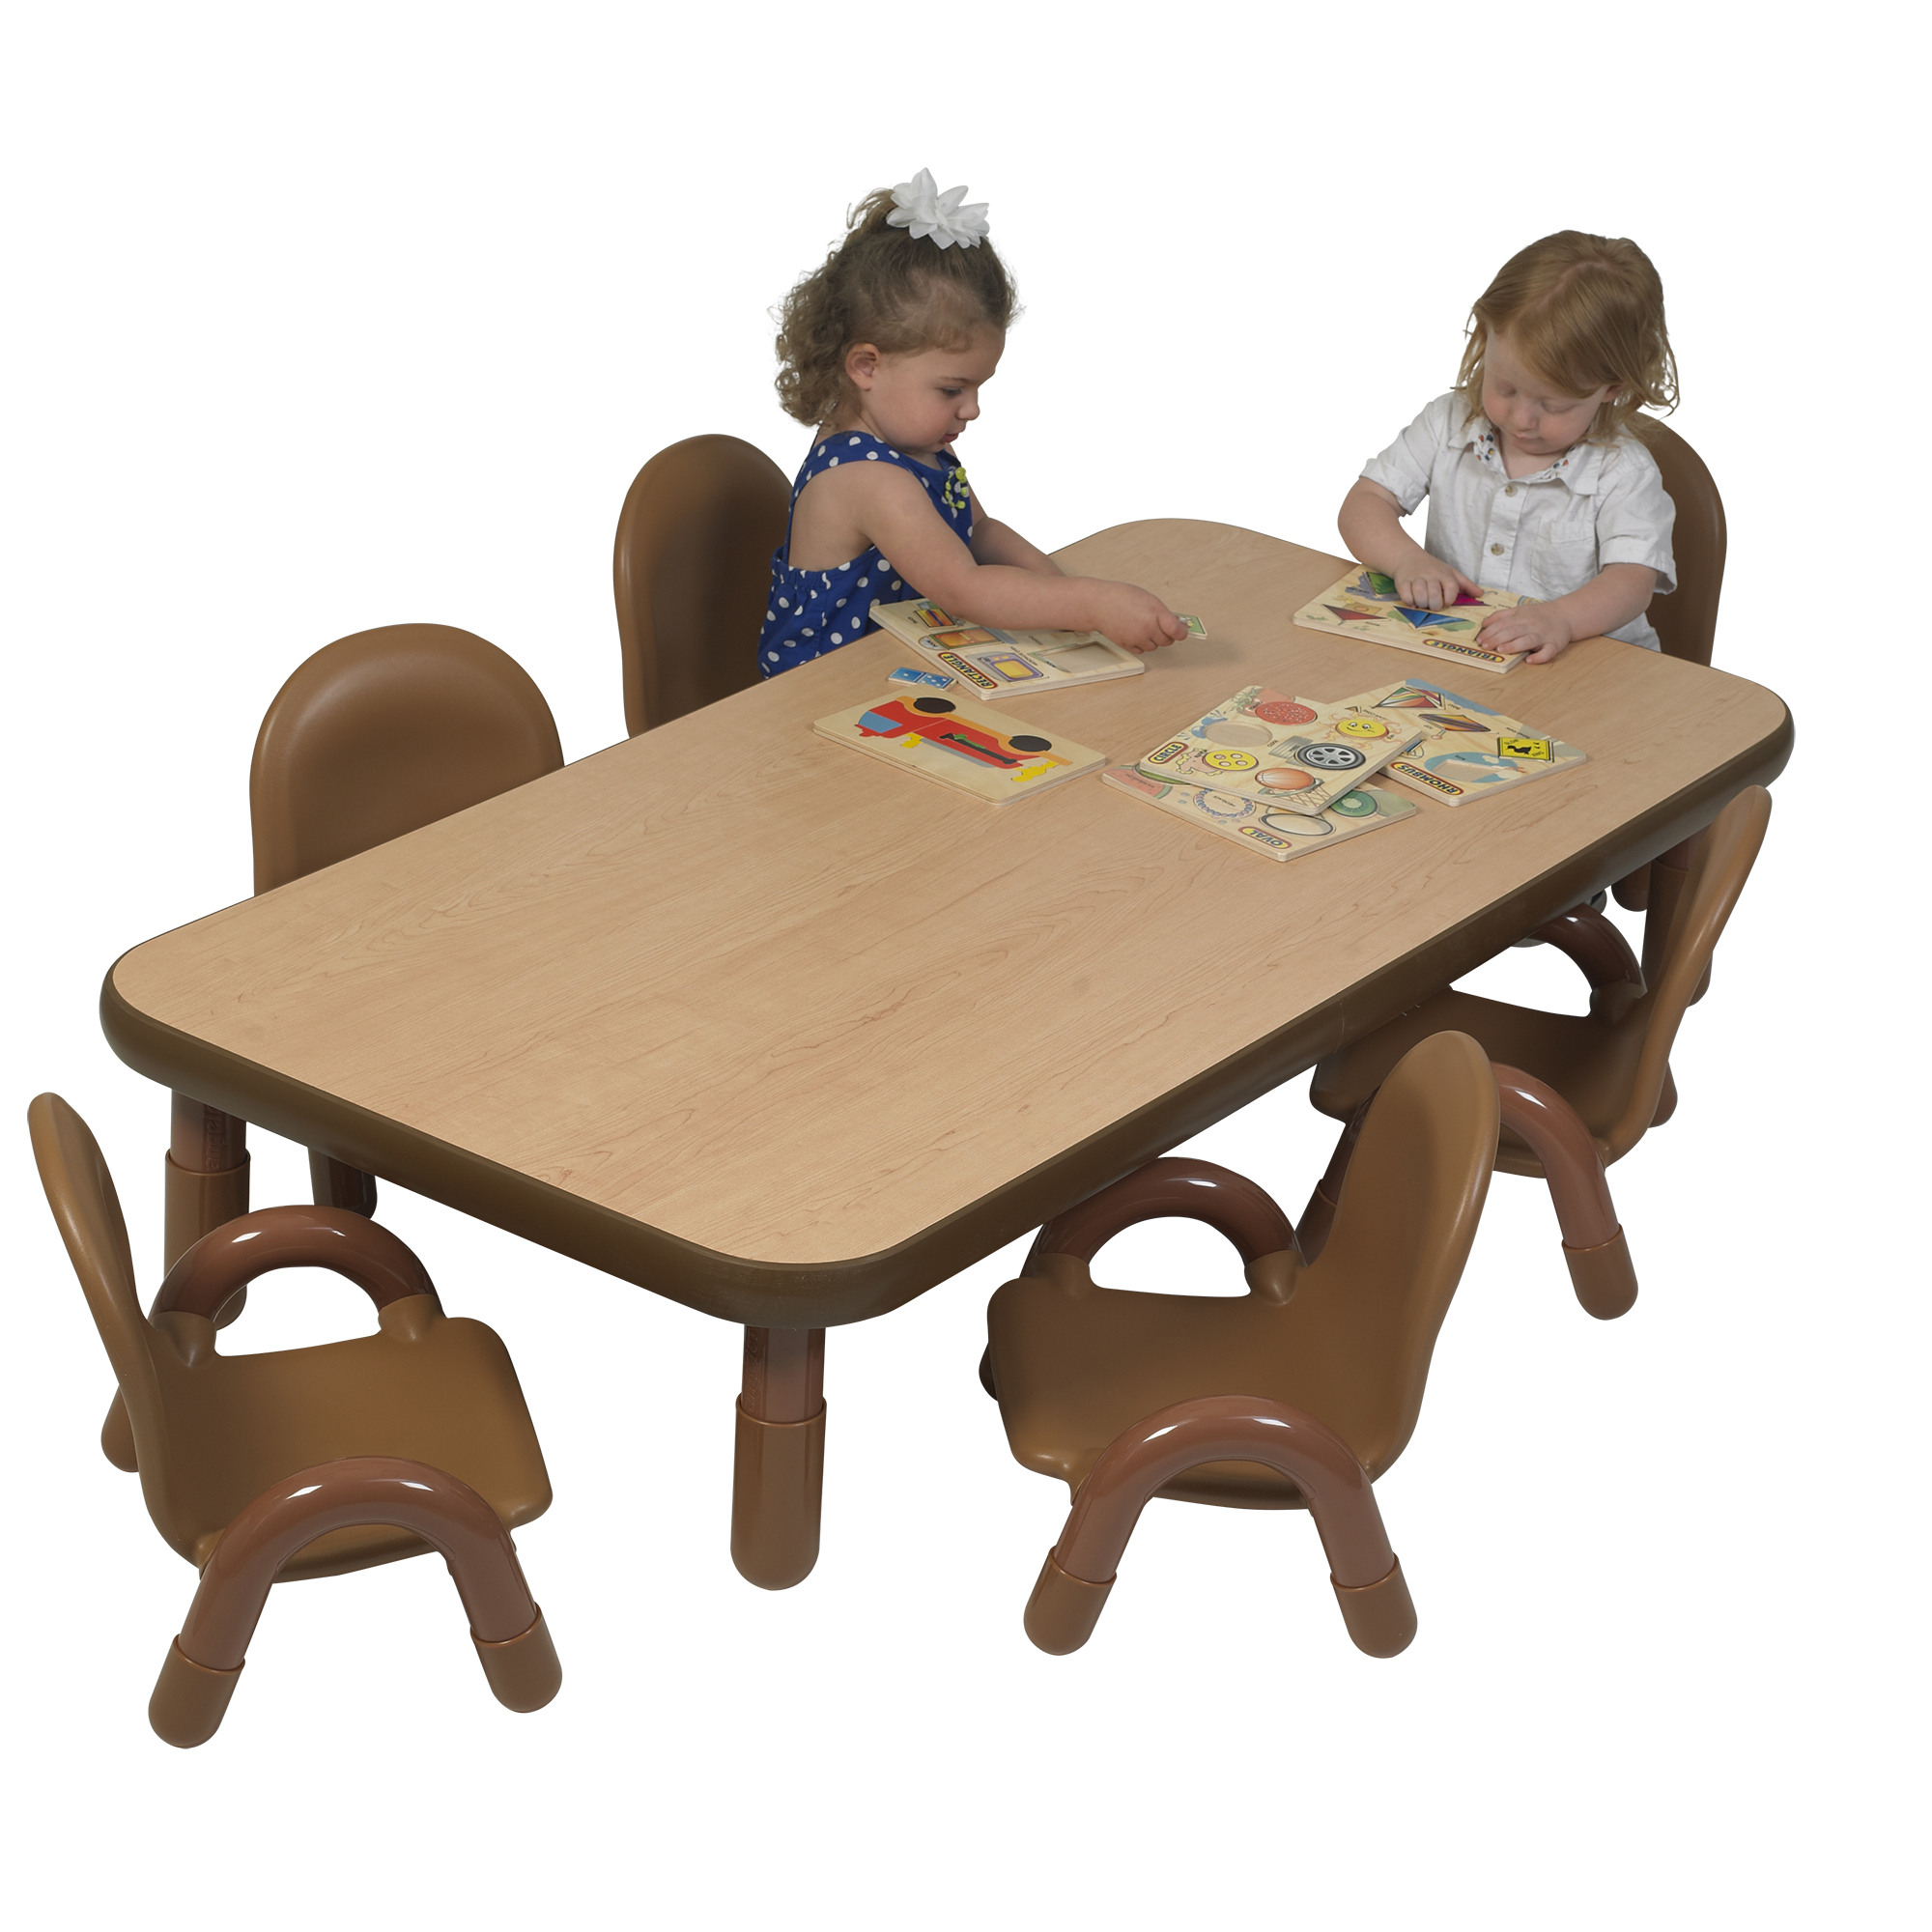 Baseline Toddler 60 X 30 Rectangular Table Chair Set Natural Wood Childrens Factory